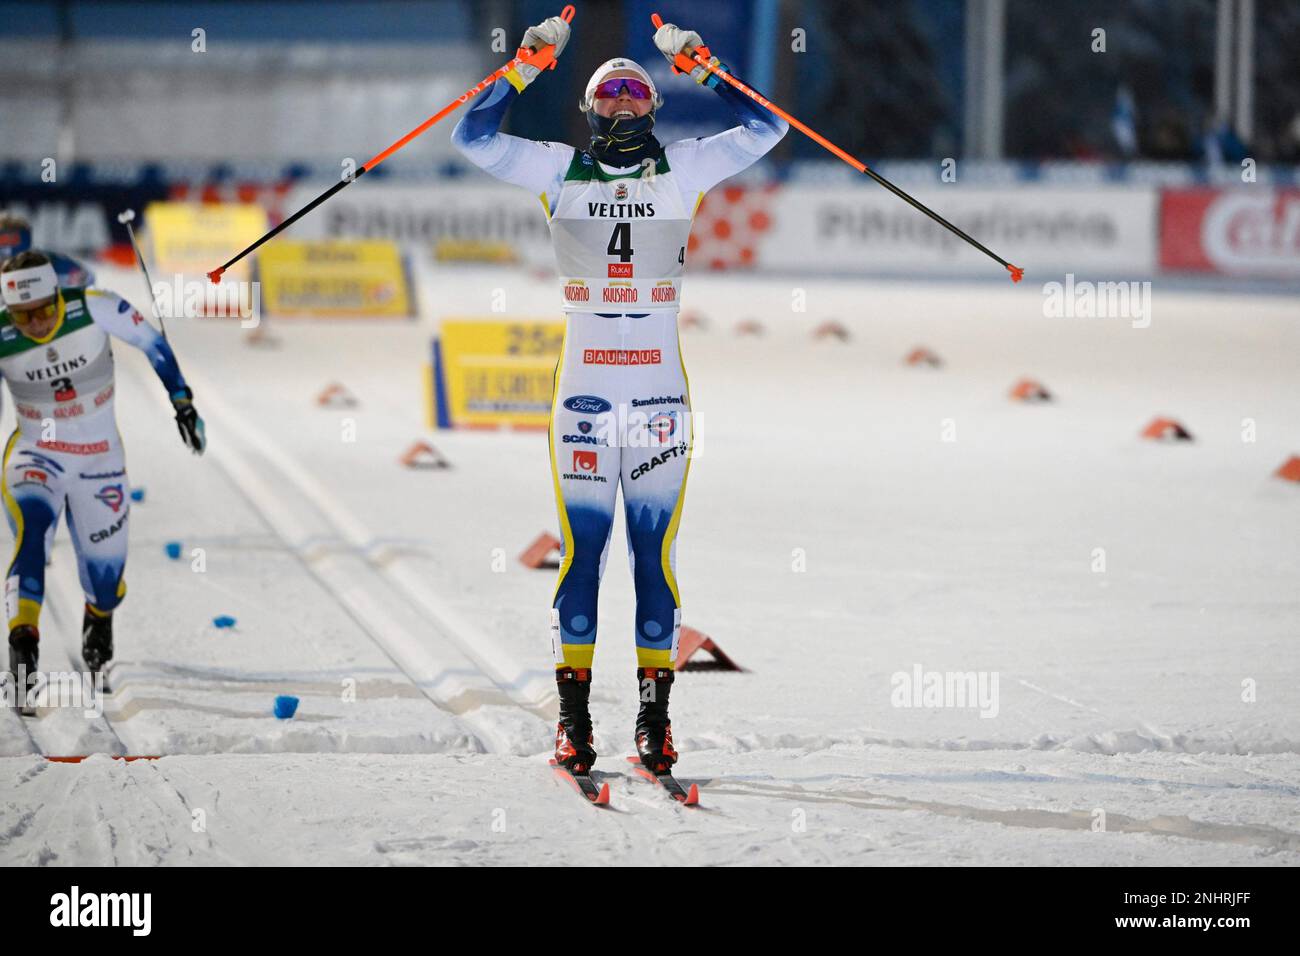 Emma Ribom of Sweden celebrates her victory in the womens cross-country skiing classic style sprint finals, at the Cross-Country Skiing World Cup Ruka Nordic Opening event at the Ruka ski resort, in